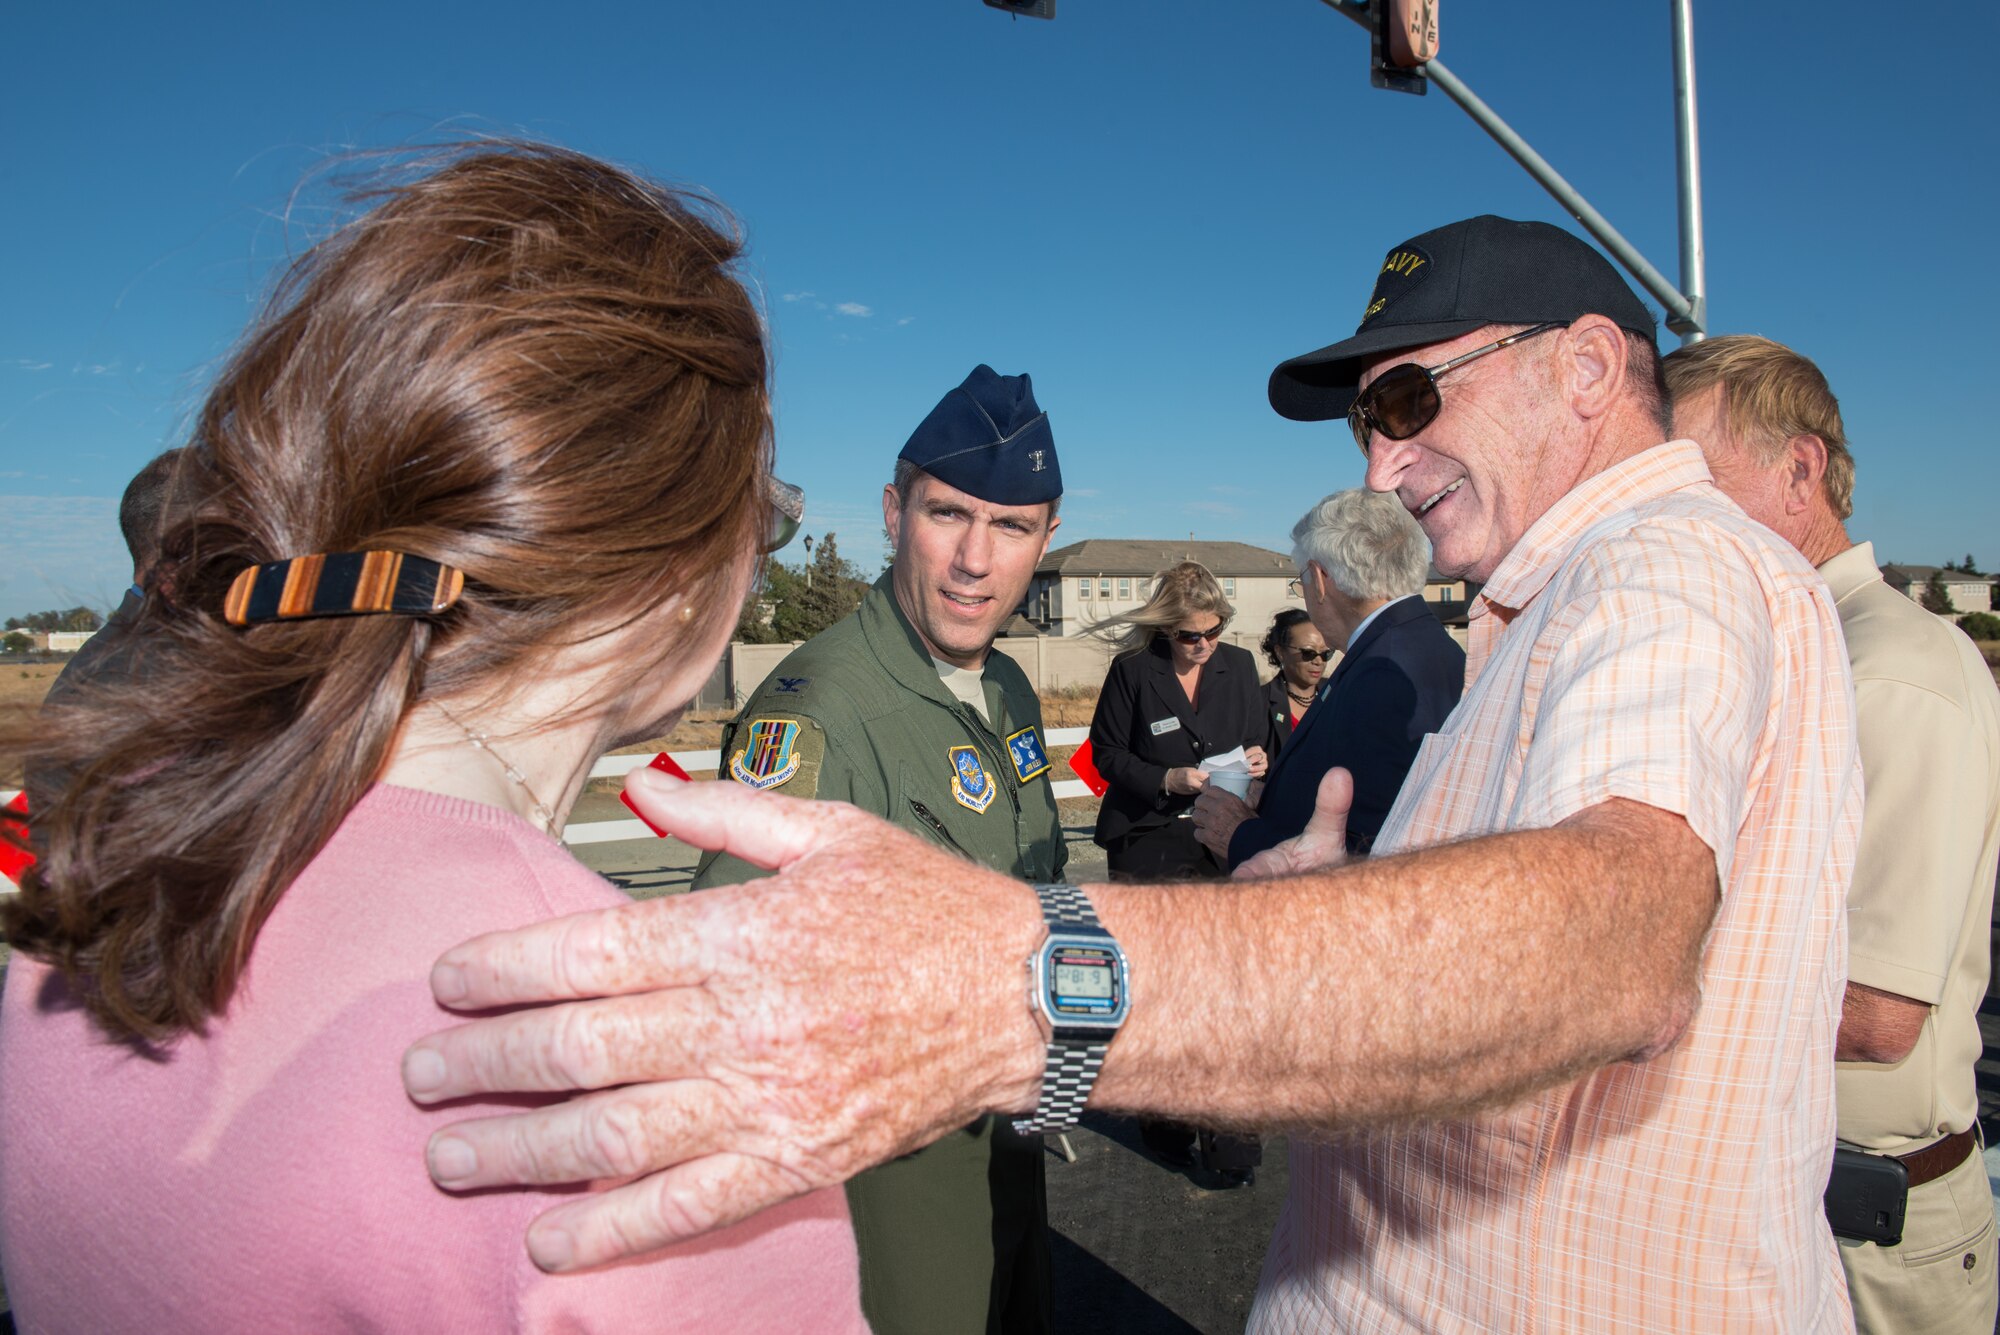 Michael Segala, councilmember for Suisun City, Calif., introduces his wife to U.S. Air Force Col. John Klein, 60th Air Mobility Wing commander, at Travis Air Force Base, before the Peabody Road reopening ceremony in Fairfield, Calif., Aug. 4, 2016. The road was closed for 14-months and finished ten days ahead of schedule. Peabody Road is a major thoroughfare that connects the cities of Vacaville and Fairfield, more than 20,000 vehicles per day use the road and it is also a major artery into Travis Air Force Base for more than 14,000 employees. The construction of the Peabody Road overpass is part of the new Fairfield-Vacaville train station project along the Capitol Corridor. (U.S. Air Force photo by Louis Briscese) 